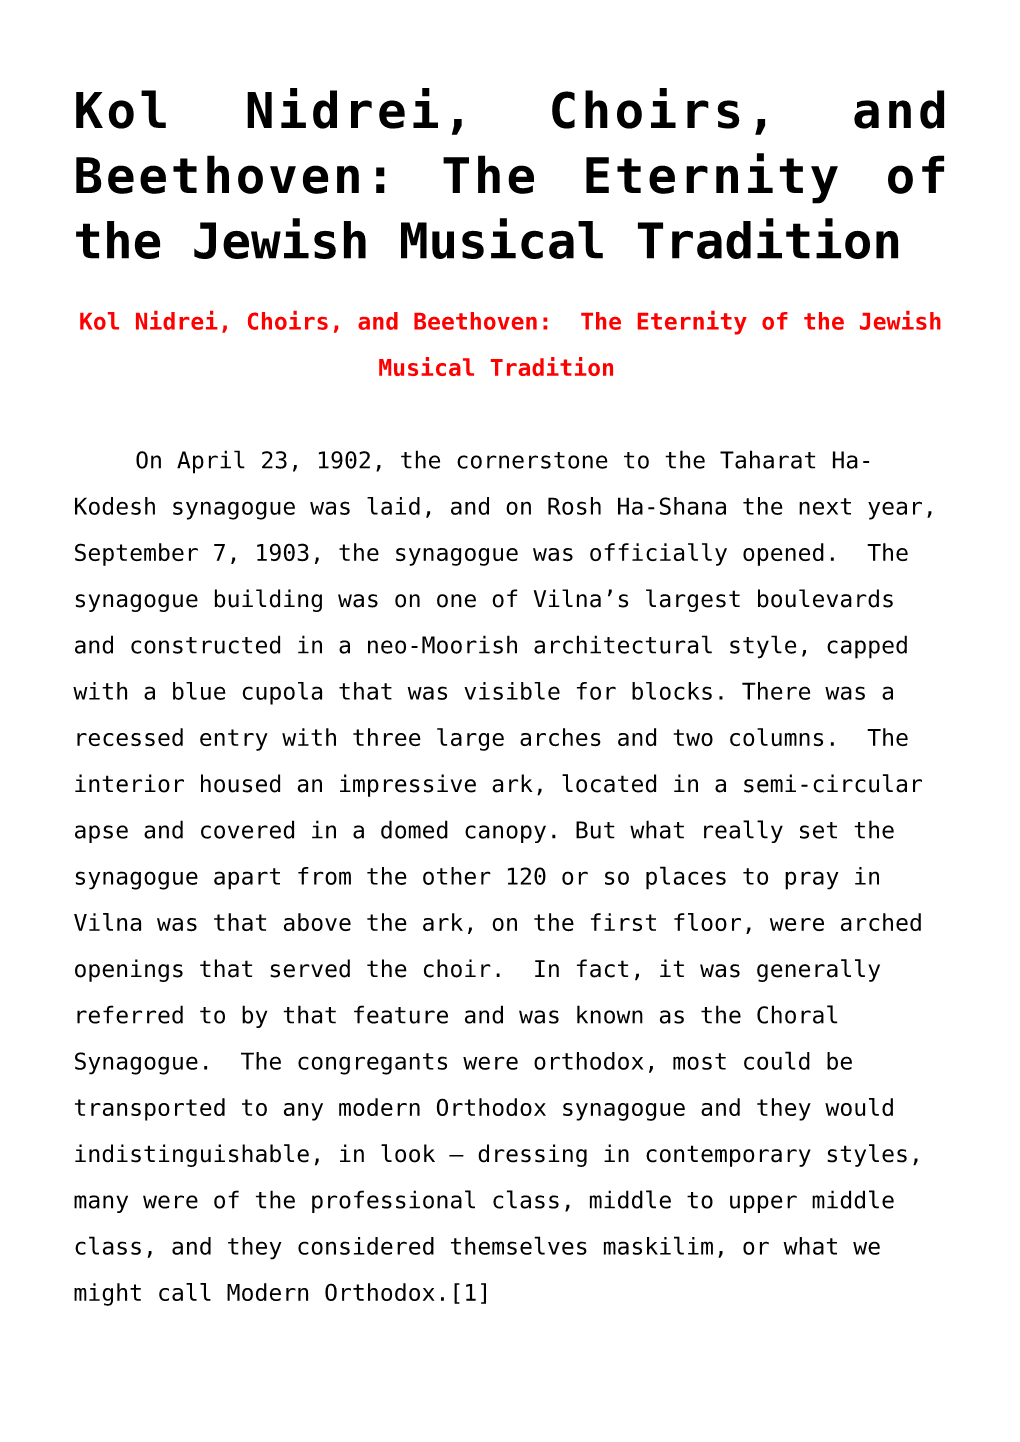 Kol Nidrei, Choirs, and Beethoven: the Eternity of the Jewish Musical Tradition